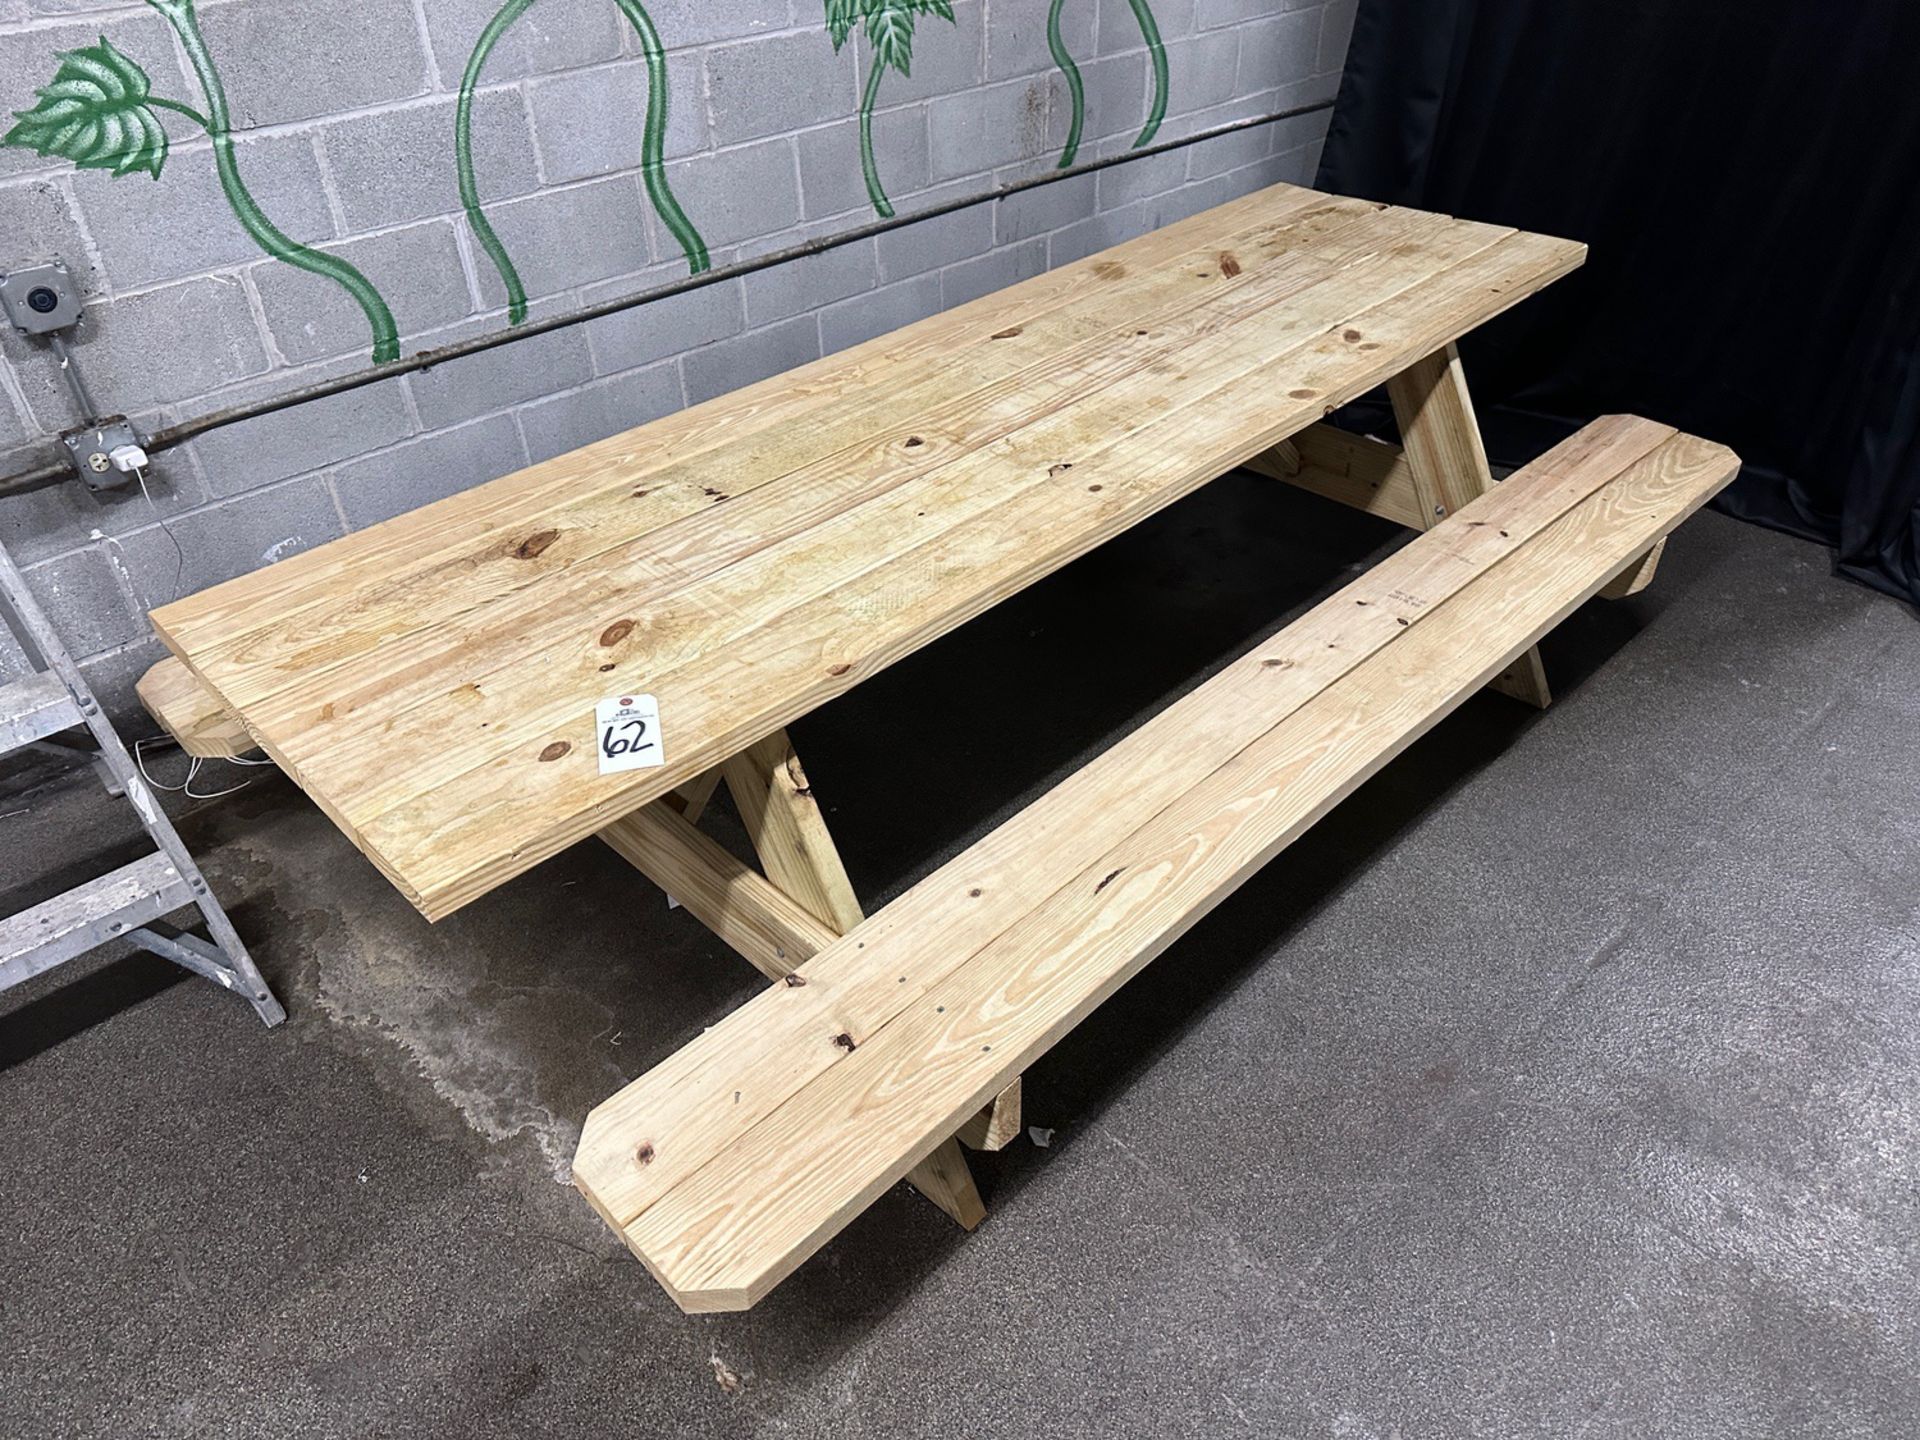 Heavy Duty Wooden Picnic Table (Approx. 28" x 8' Tabletop with 5' x 8' Footprint) | Rig Fee $60